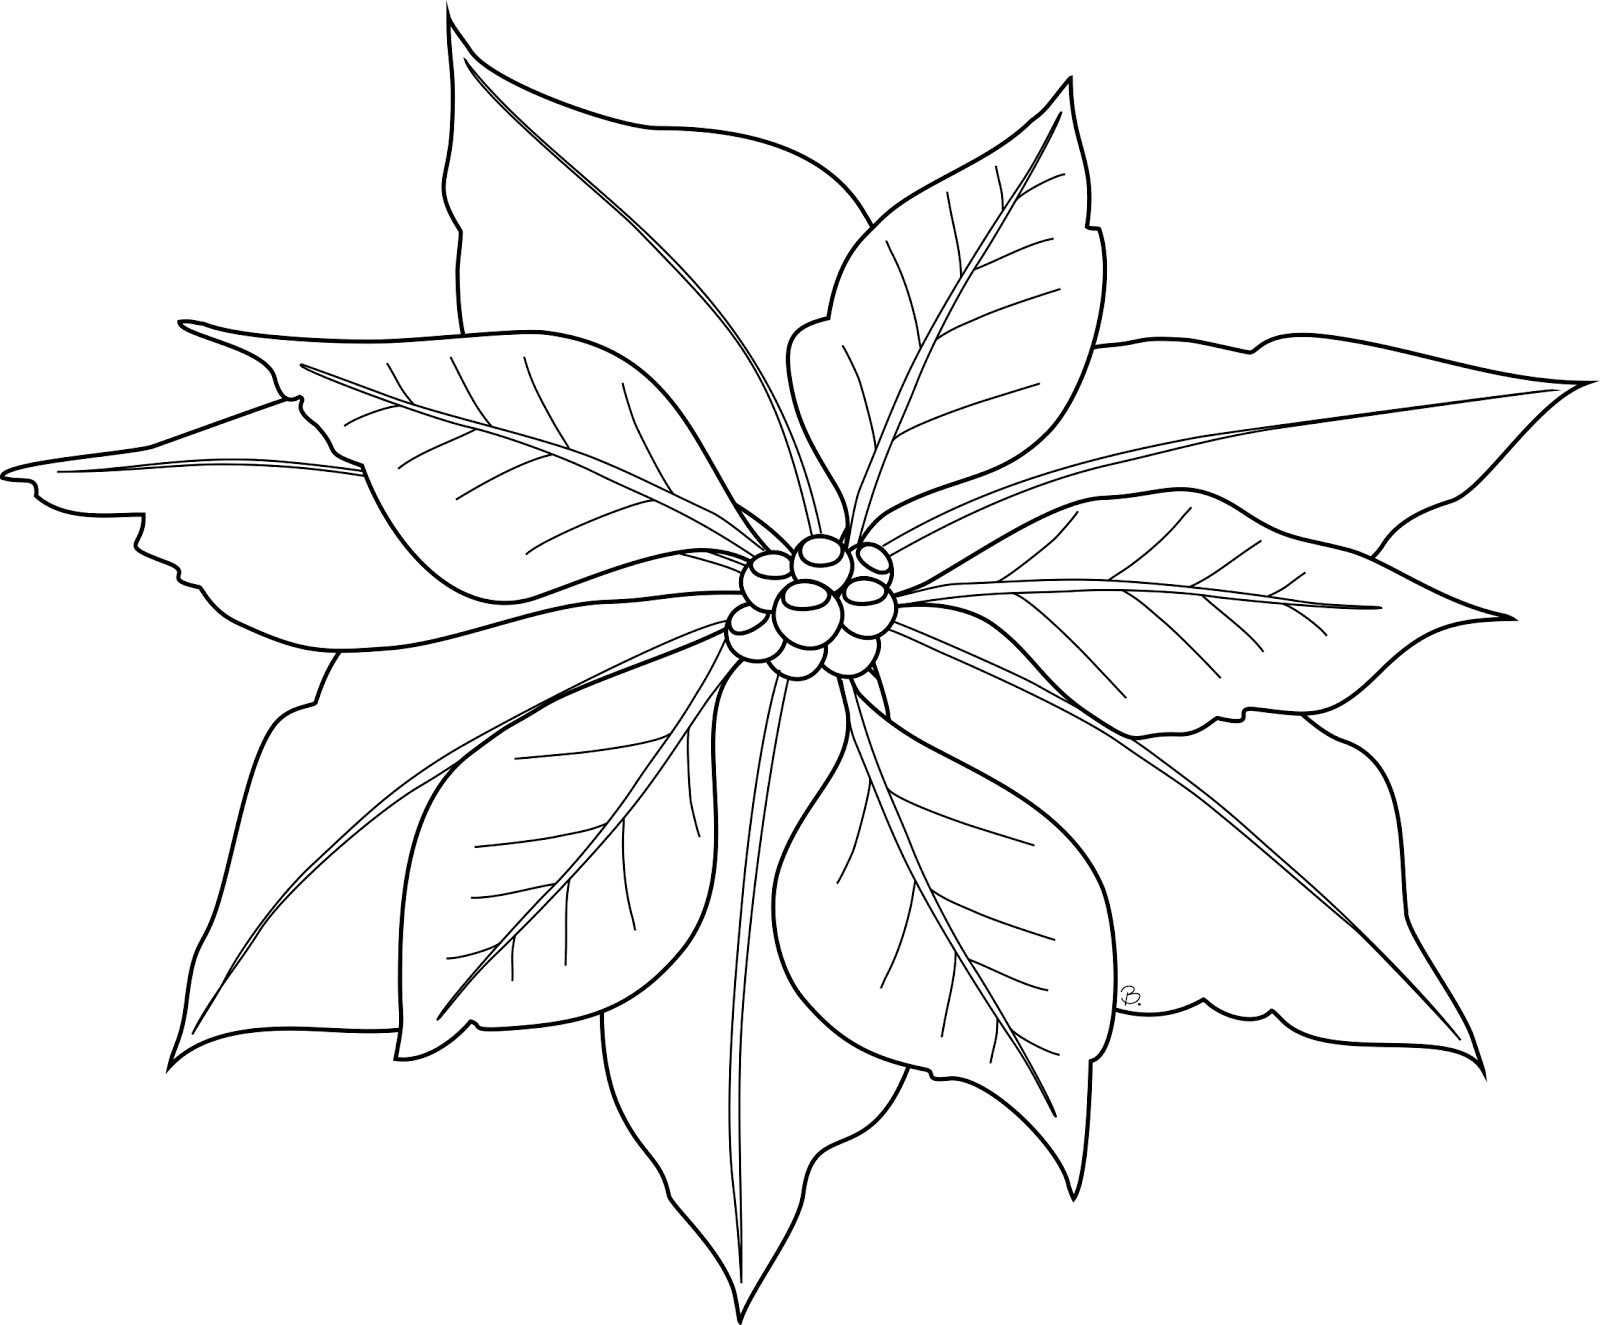 Mistletoe Coloring Pages Printable at Free printable